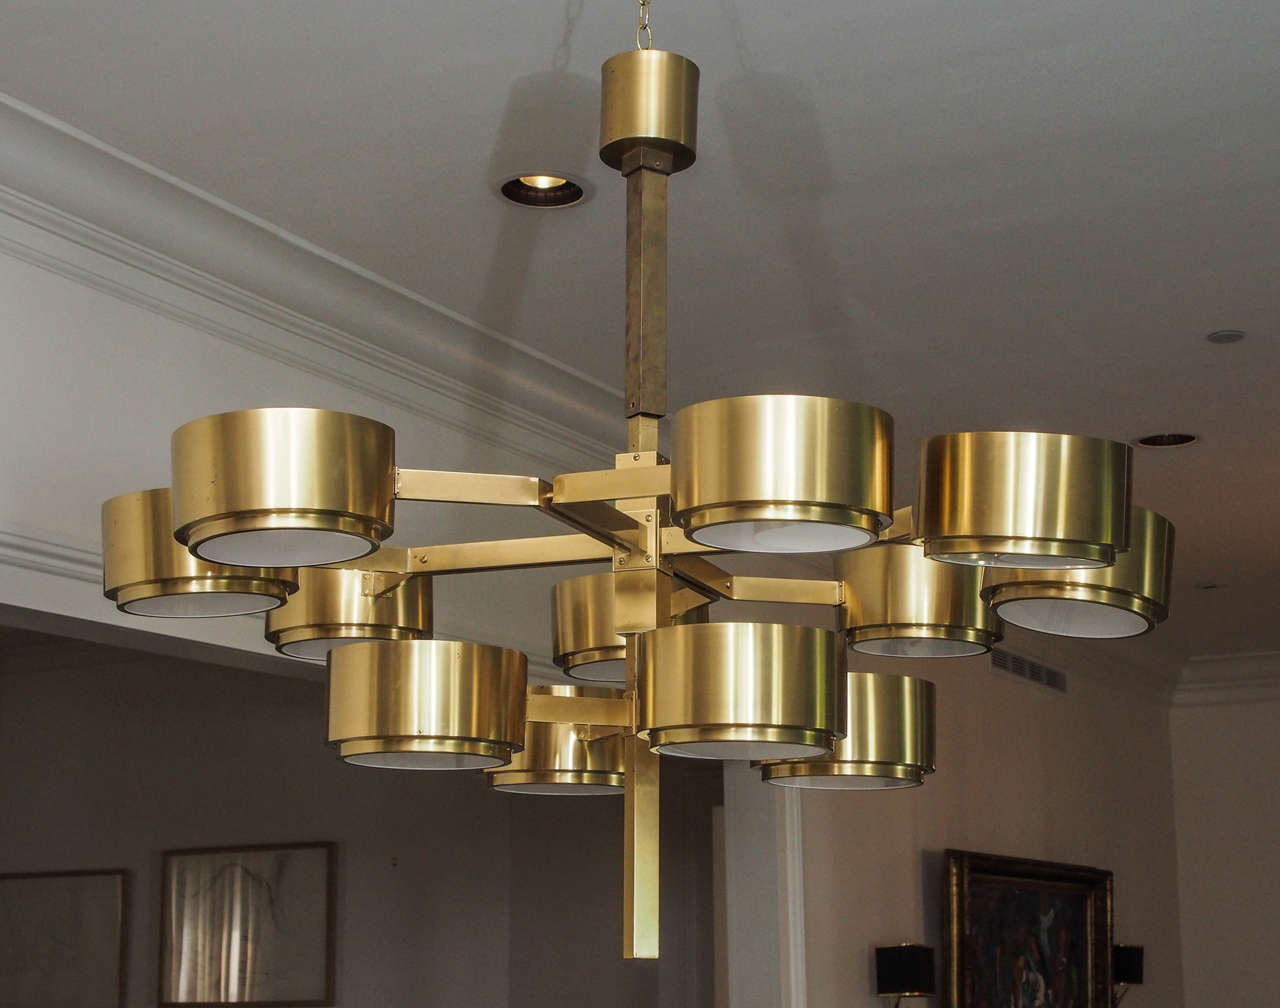 Two impressive twelve-light chandeliers in brass; opaque white glass shields the lamps.